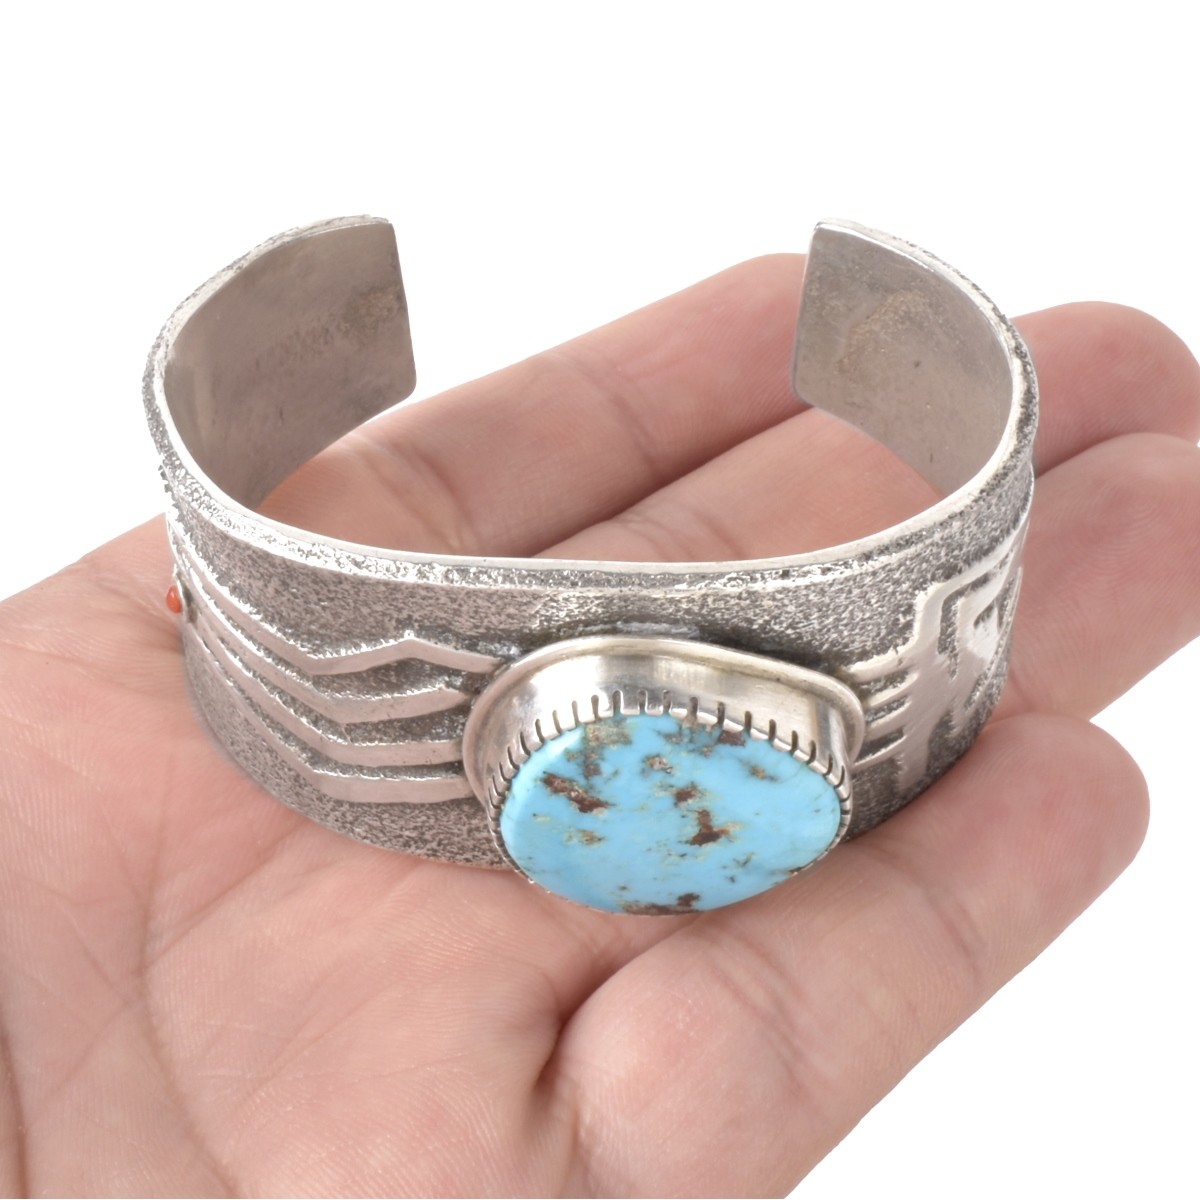 Robt. Sorrell Silver and Turquoise Bracelet